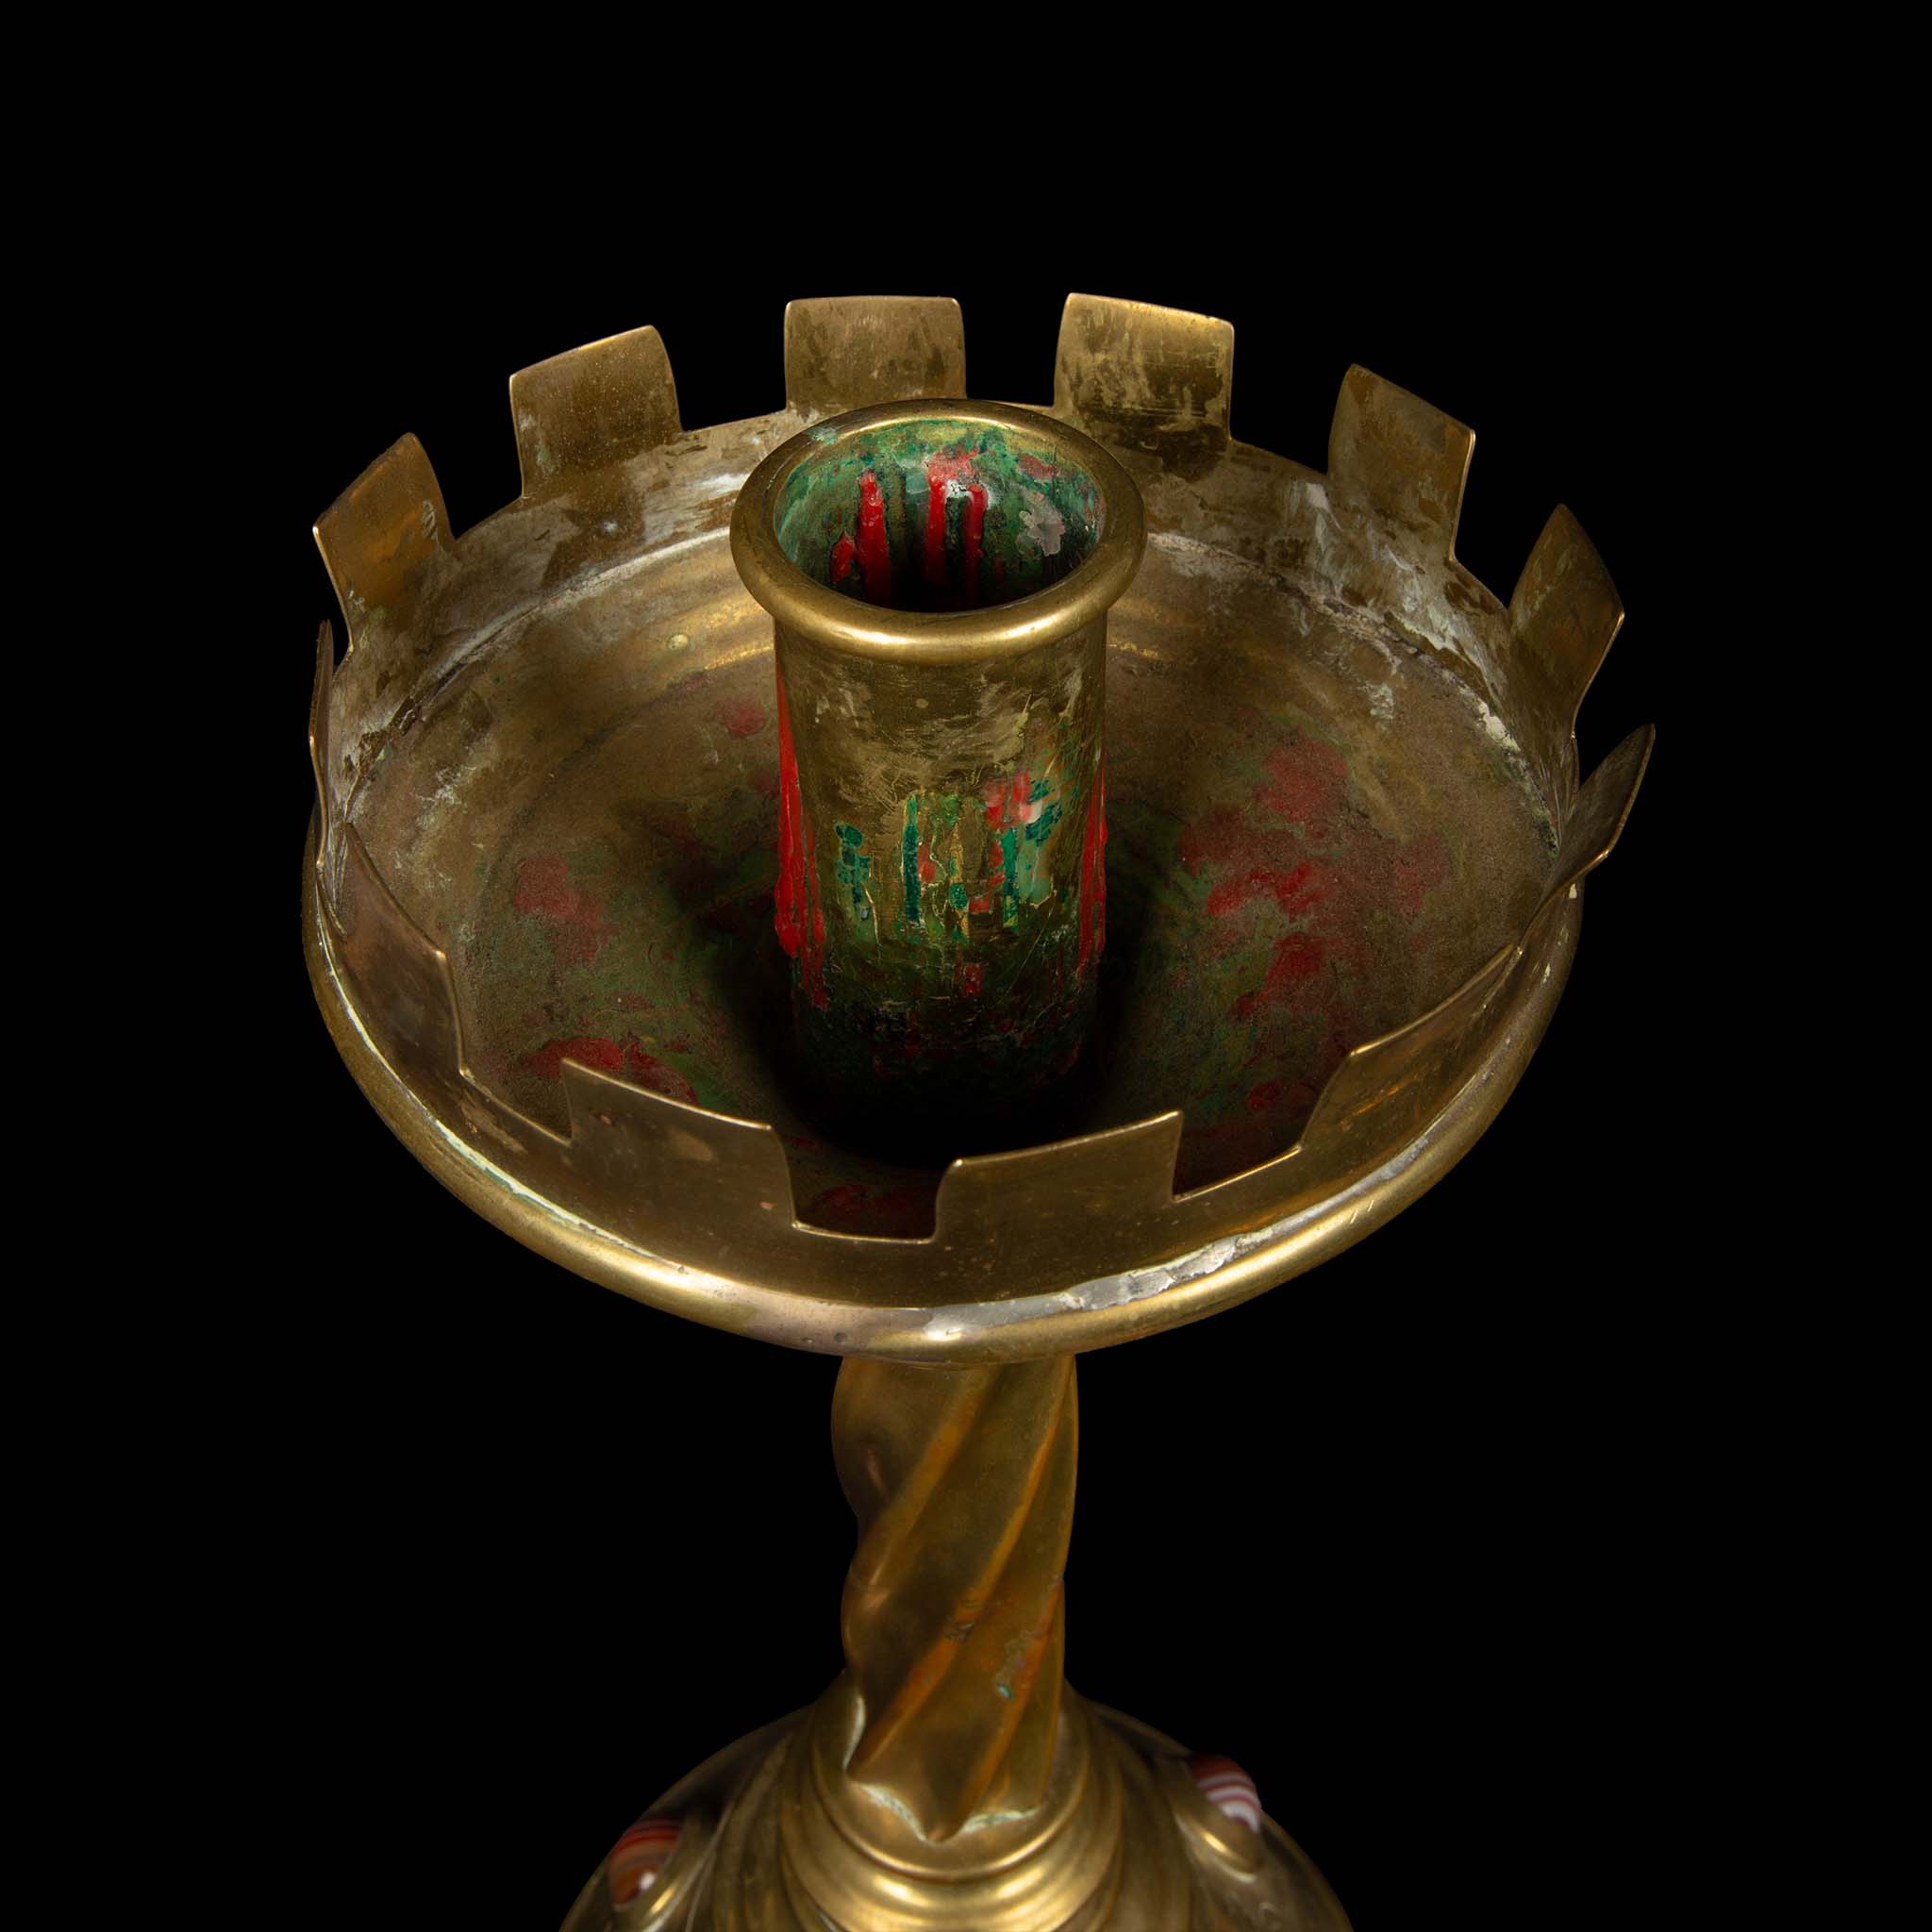 20th Century Brass and Agate Gothic Style Candle Sticks